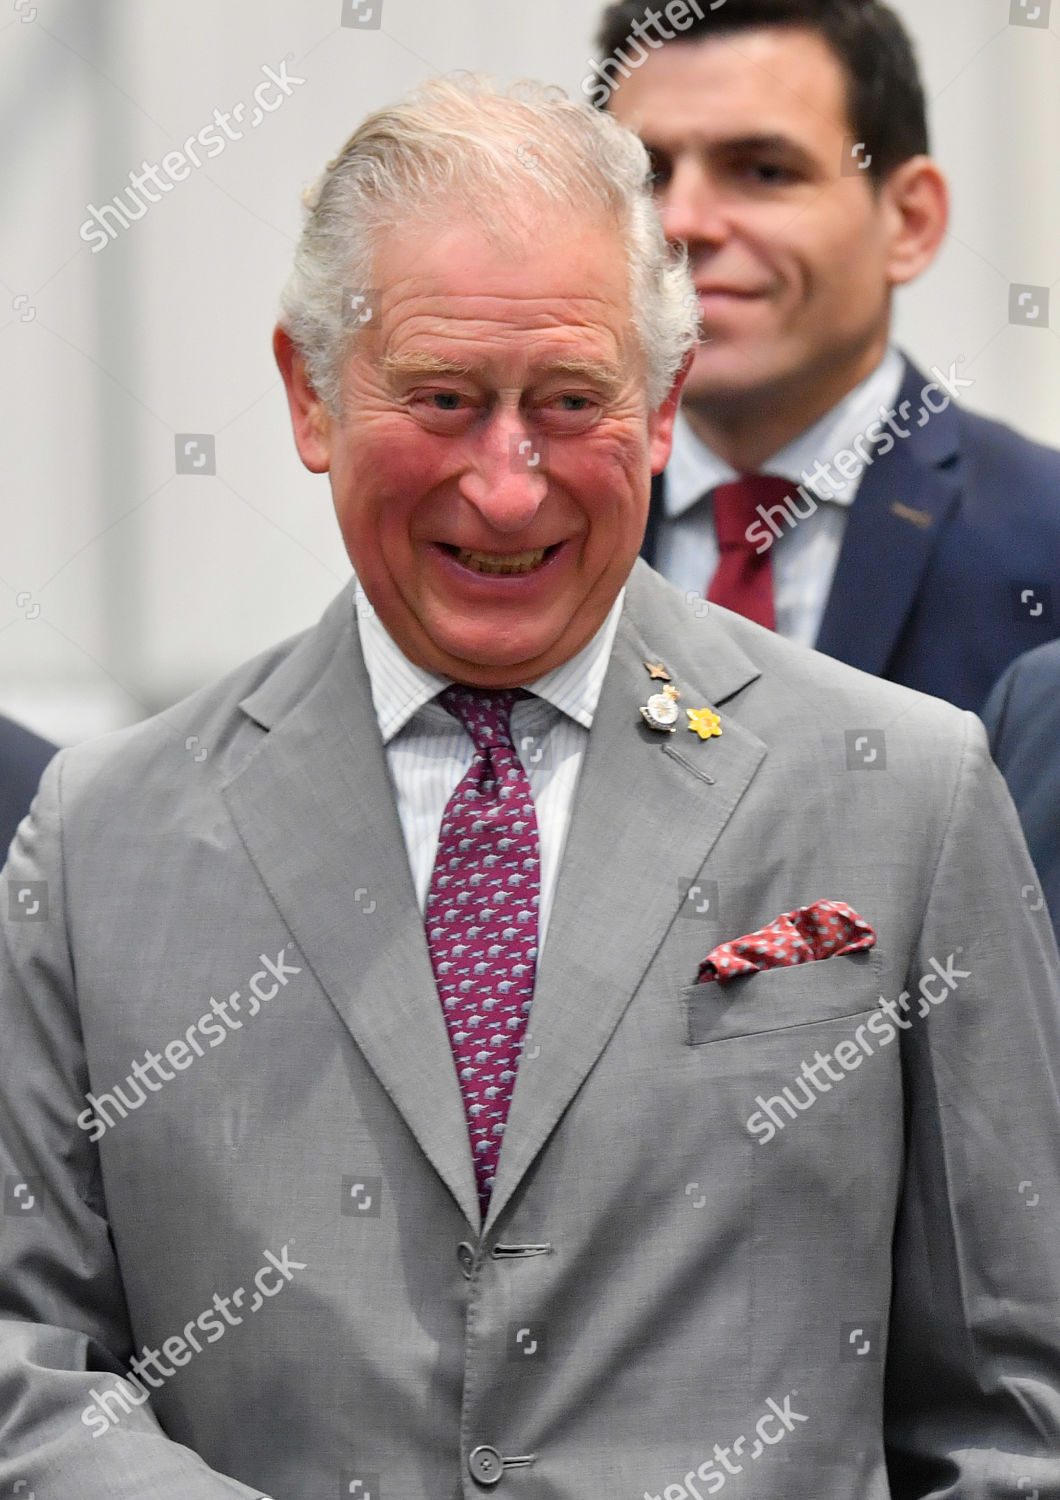 prince-charles-visit-to-south-wales-uk-shutterstock-editorial-10563131l.jpg